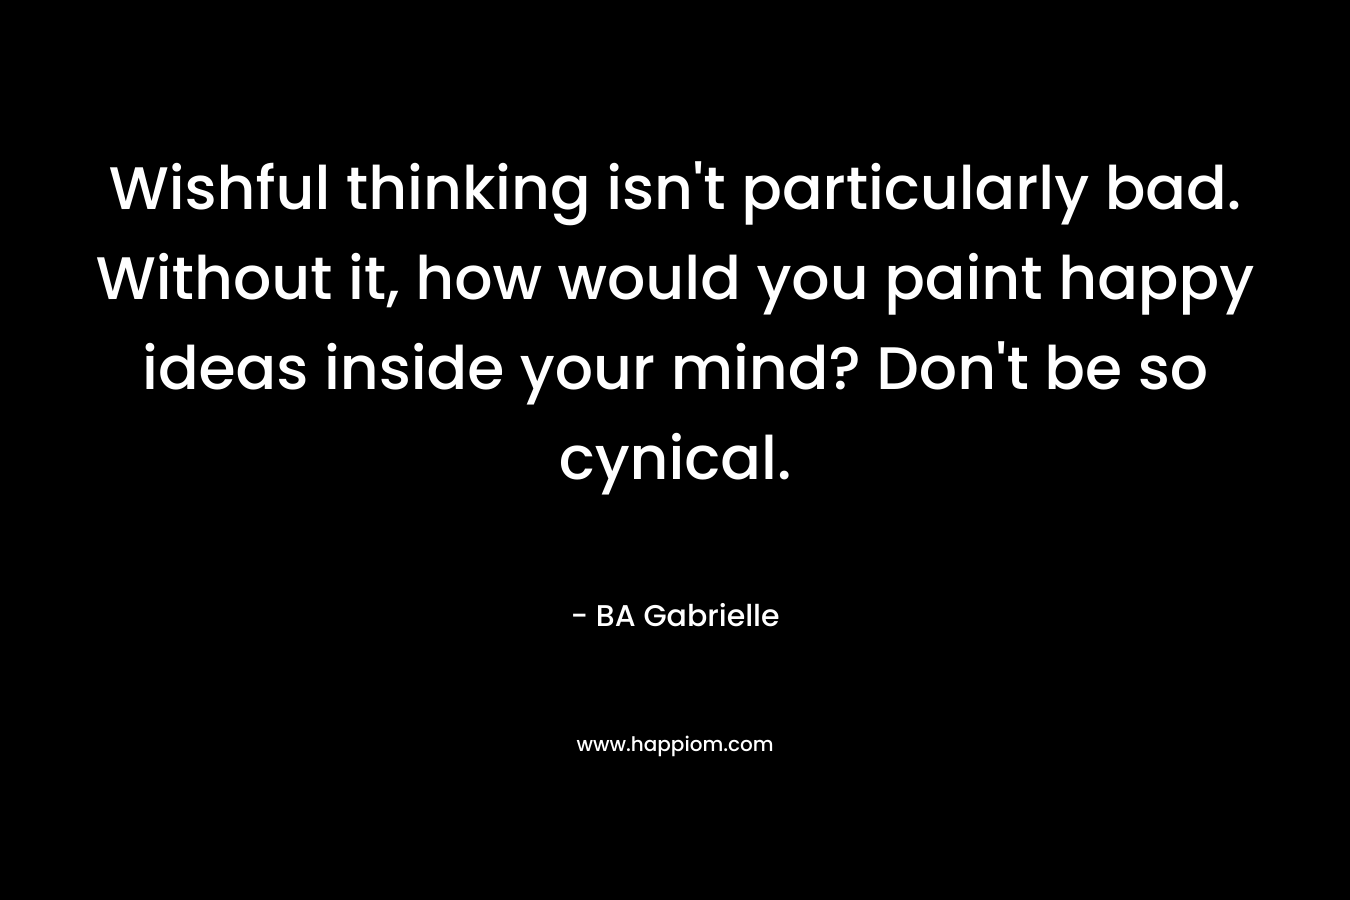 Wishful thinking isn't particularly bad. Without it, how would you paint happy ideas inside your mind? Don't be so cynical.